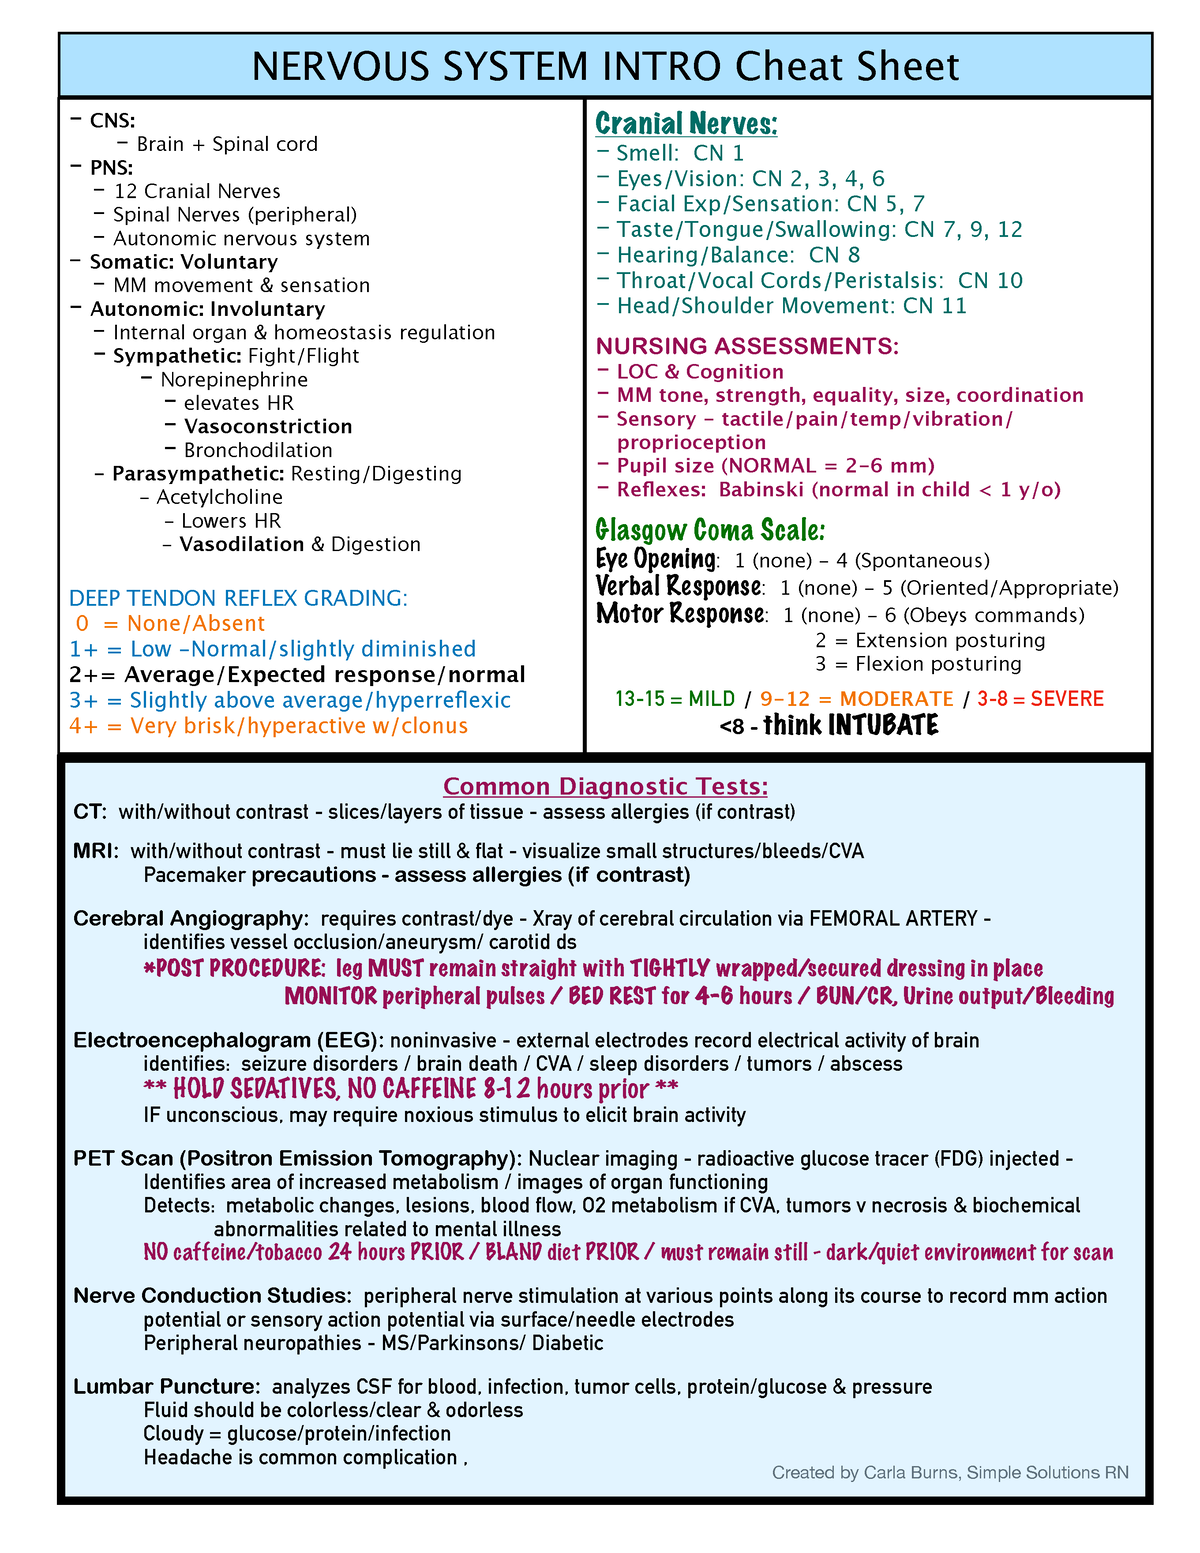 Nervous System Intro Cheat Sheet - Created by Carla Burns, Simple ...